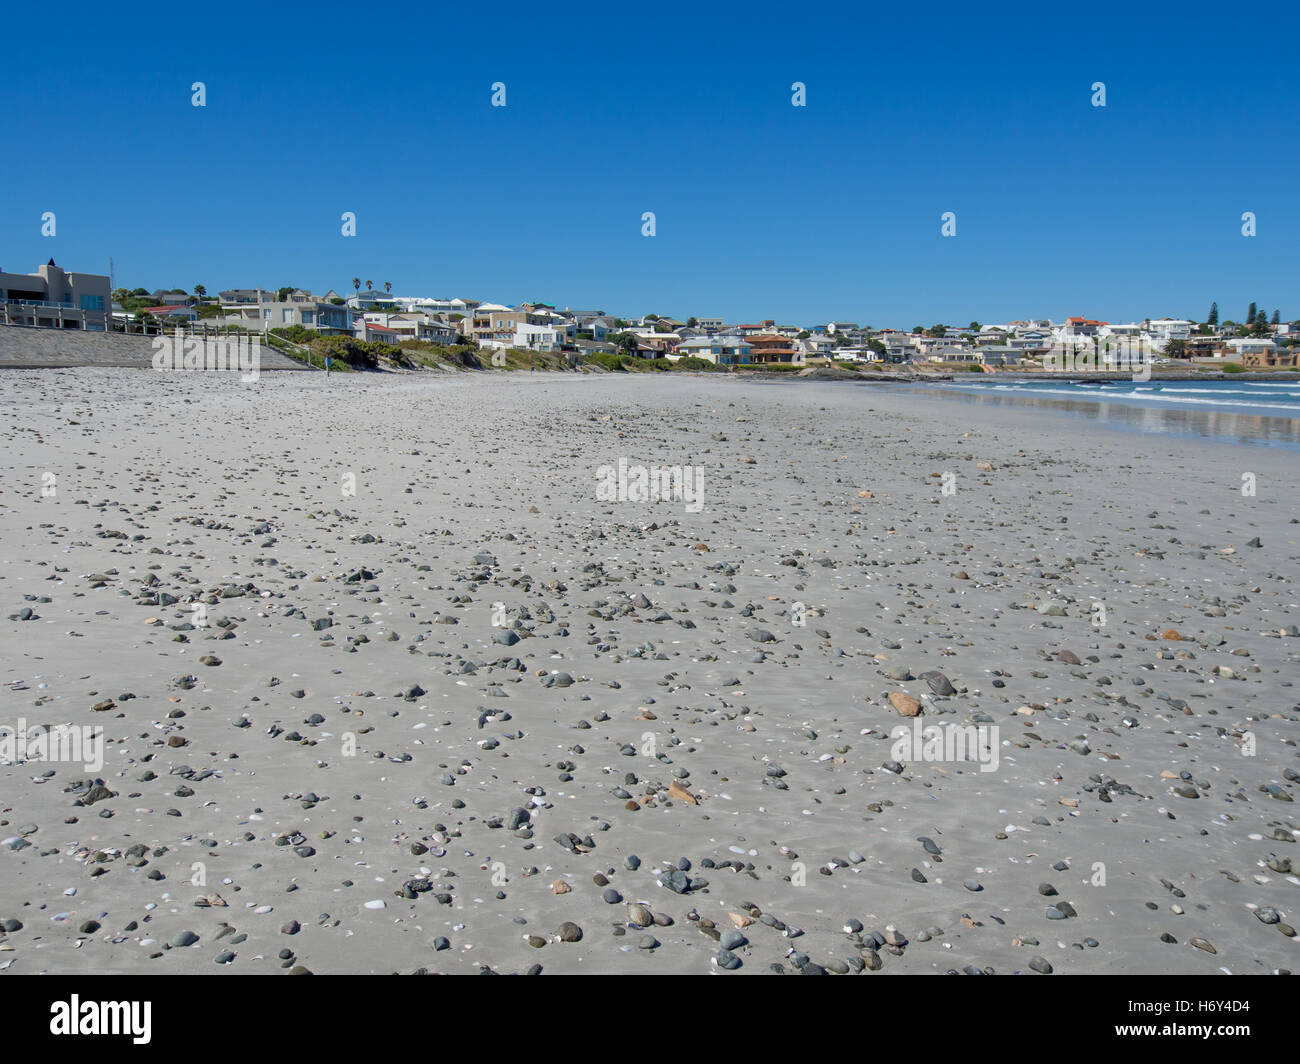 Deserted sand and pebble beach at Yzerfontein, South Africa. Stock Photo